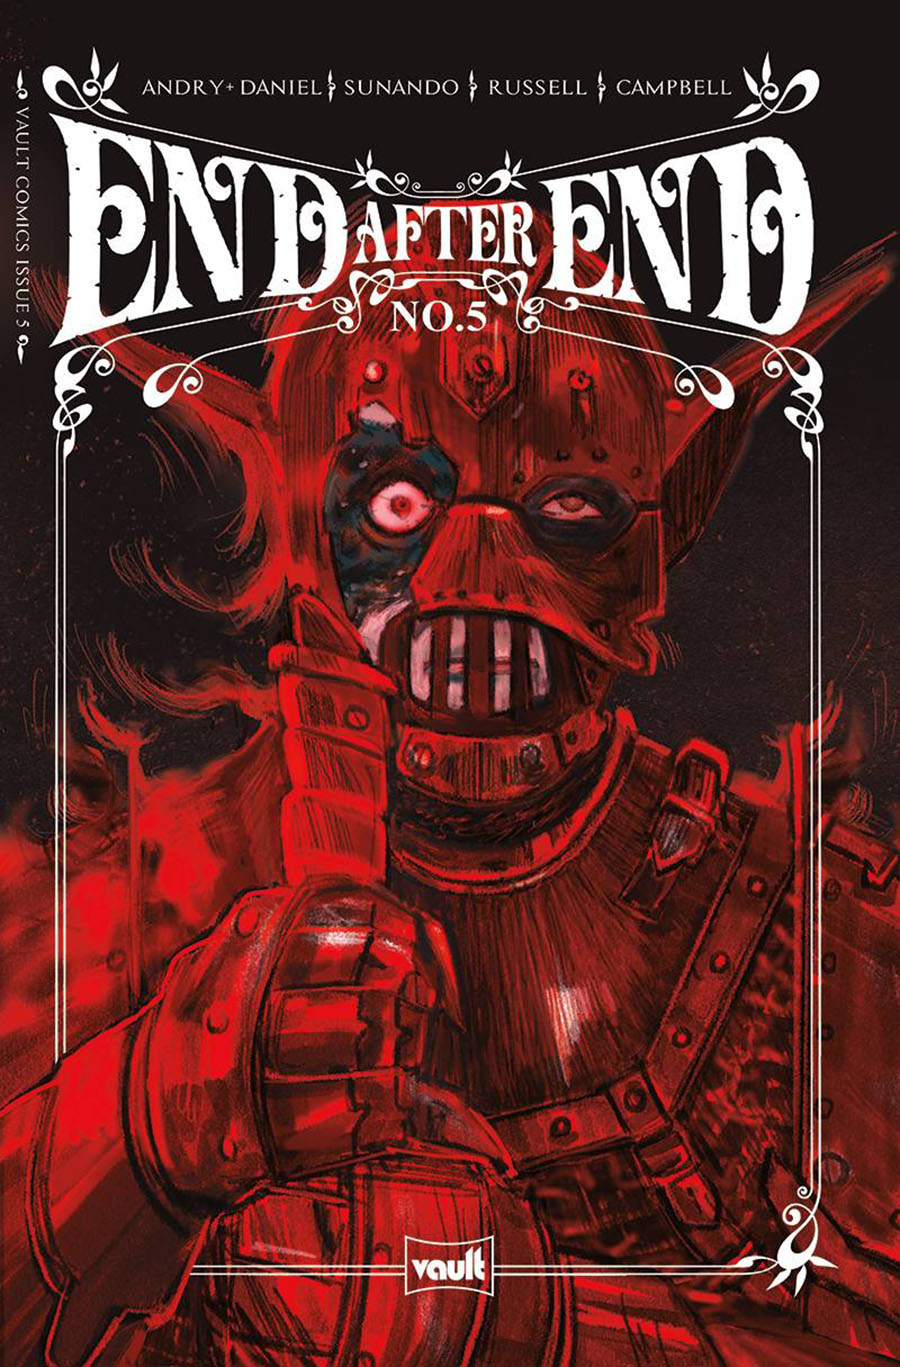 End After End #5 Cover A Regular Sunando C Cover